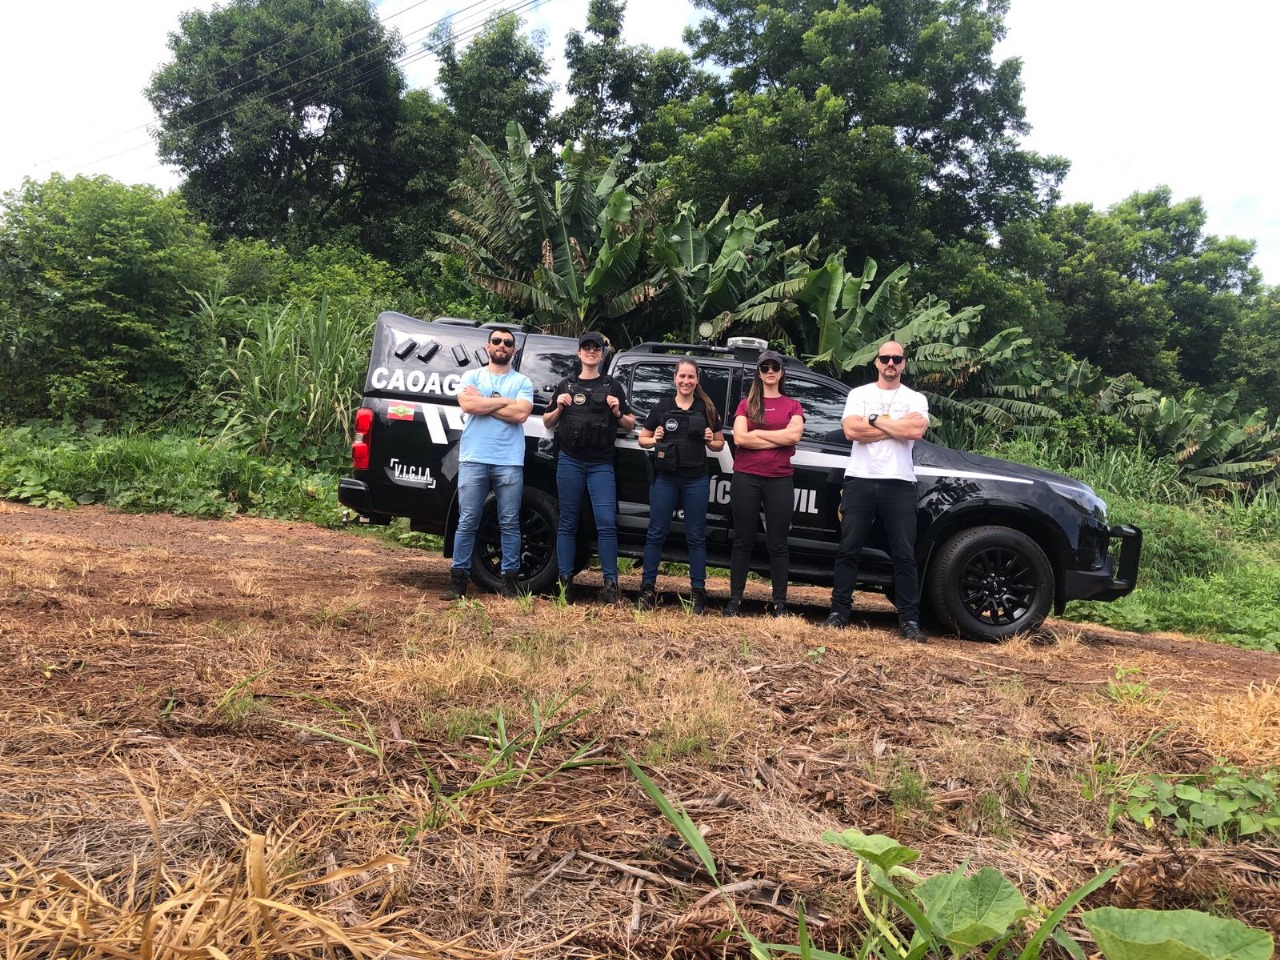 The action was carried out by the Civil Police through CAOAGRO together with the Civil Police from Operation Hórus and Cidasc - Civil Police/Reproduction/ND.